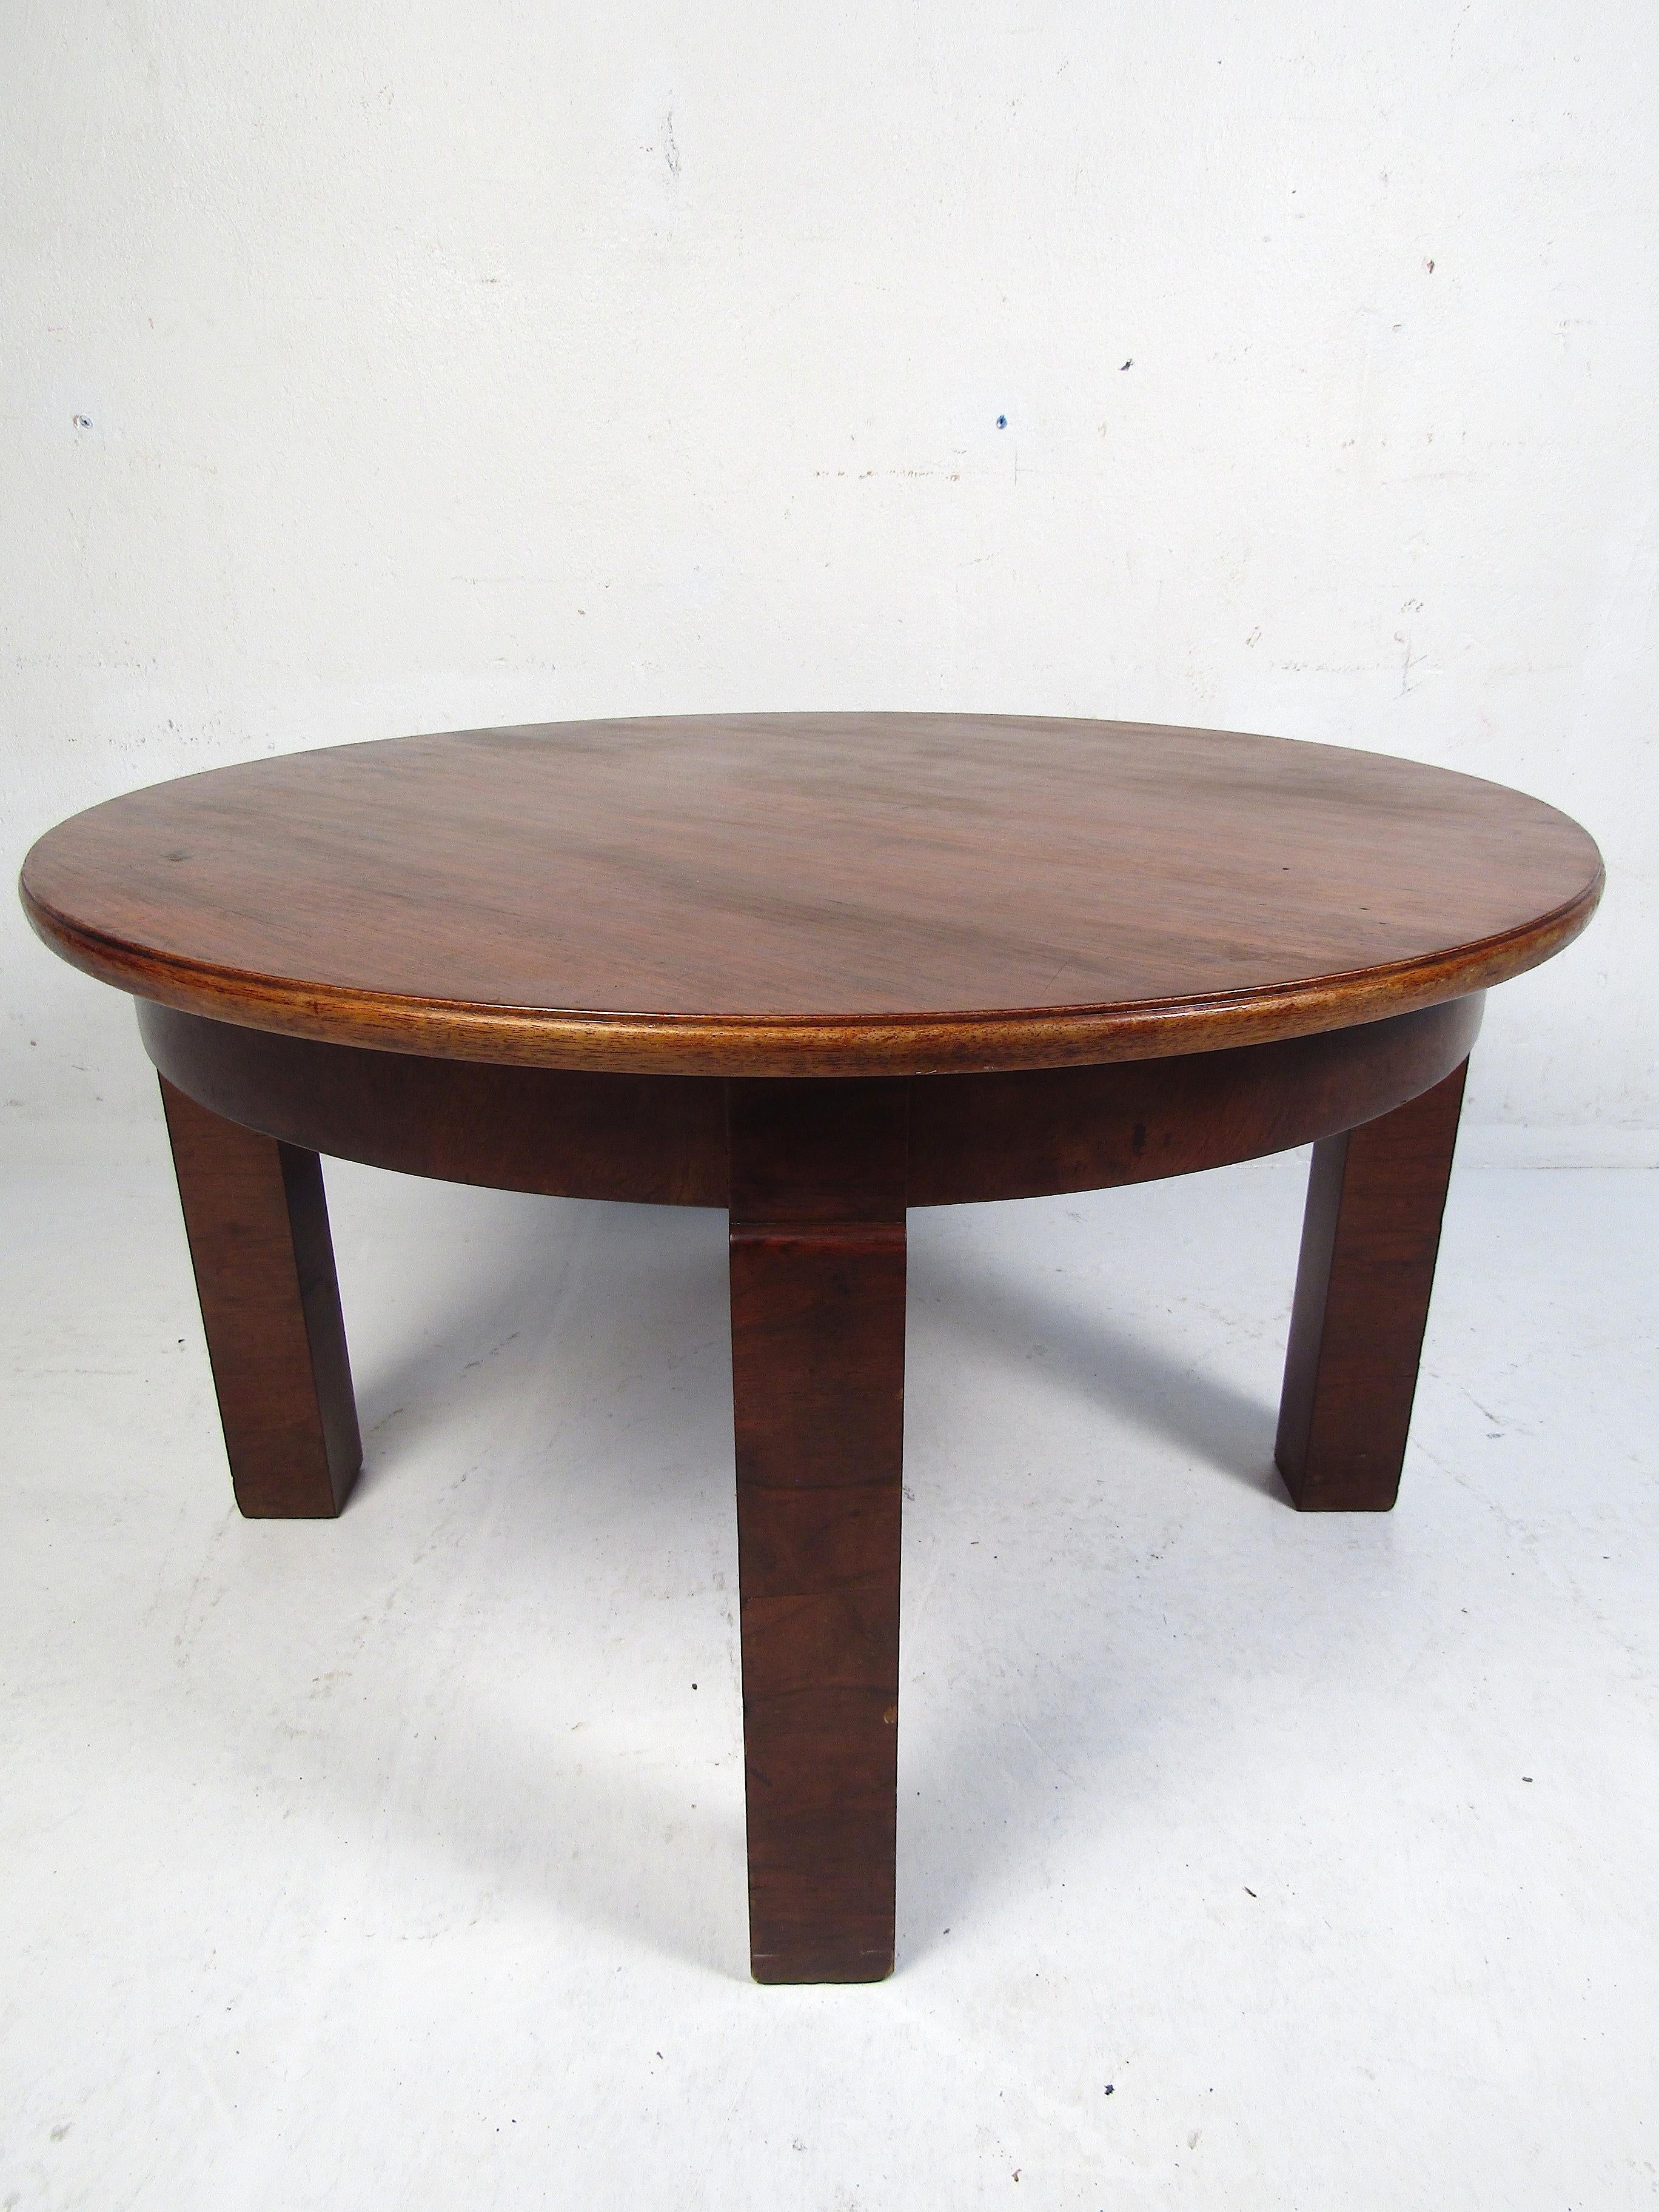 Interesting mid-century coffee table. Attractive wood grain pattern on the circular tabletop. Marked underneath - 